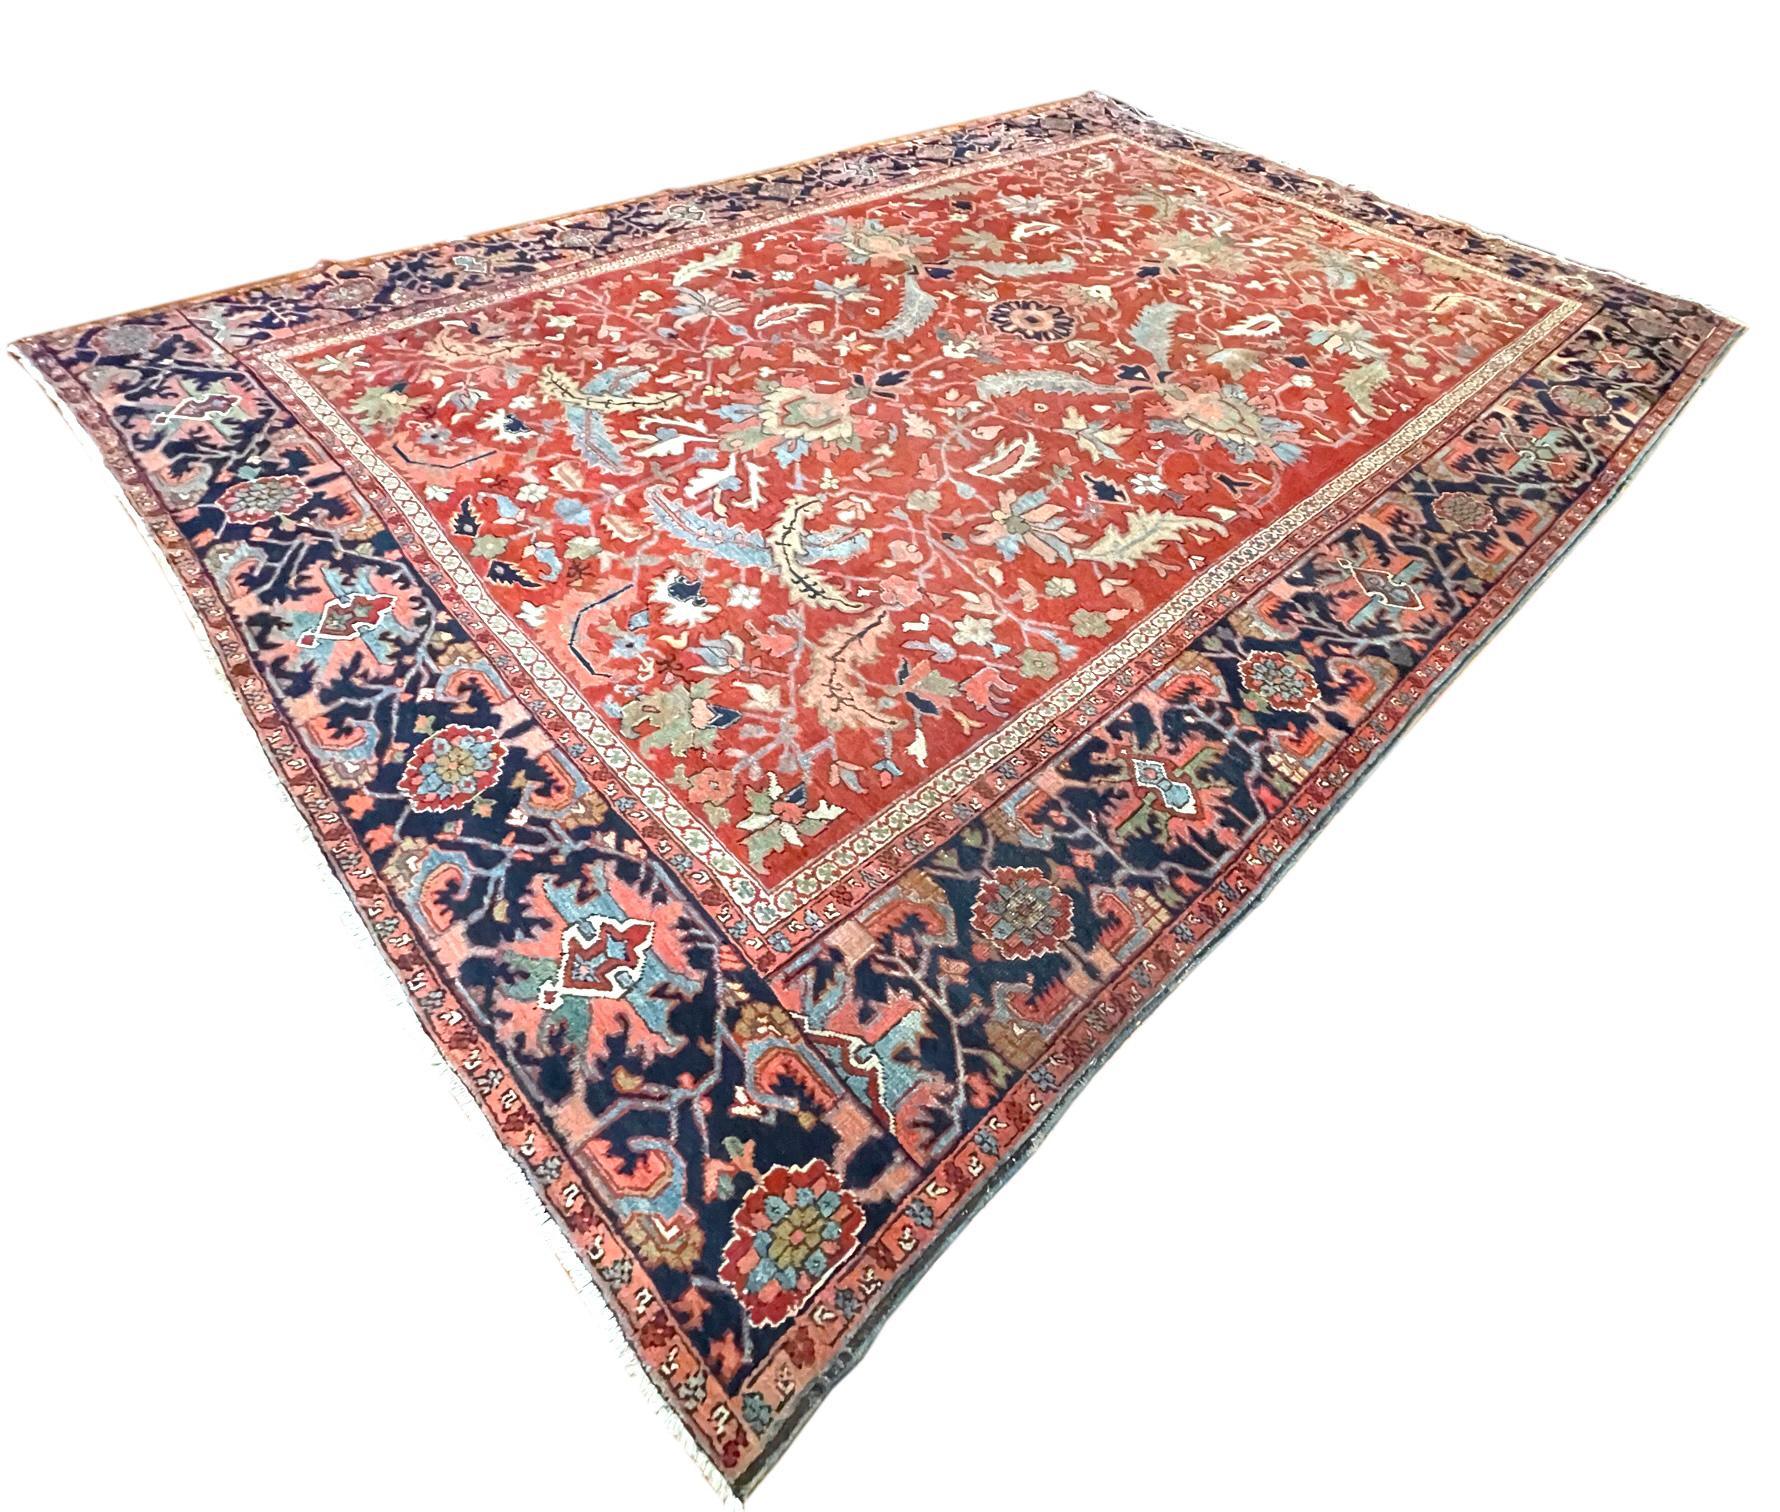 Wool Authentic Antique Persian Hand Knotted Semi Geometric Heriz Rug 1920 Circa For Sale